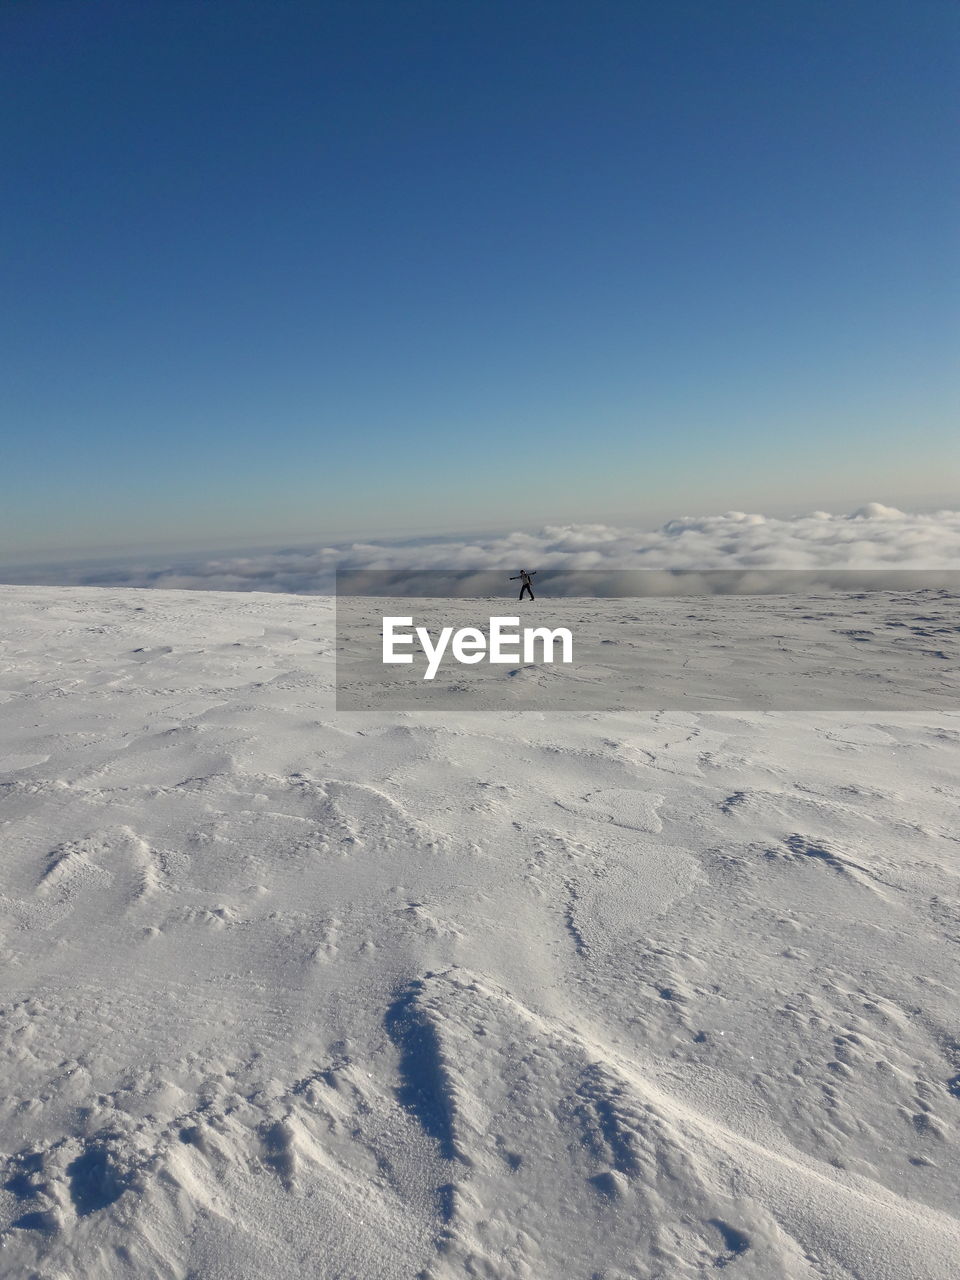 Scenic view of snowy landscape against clear sky